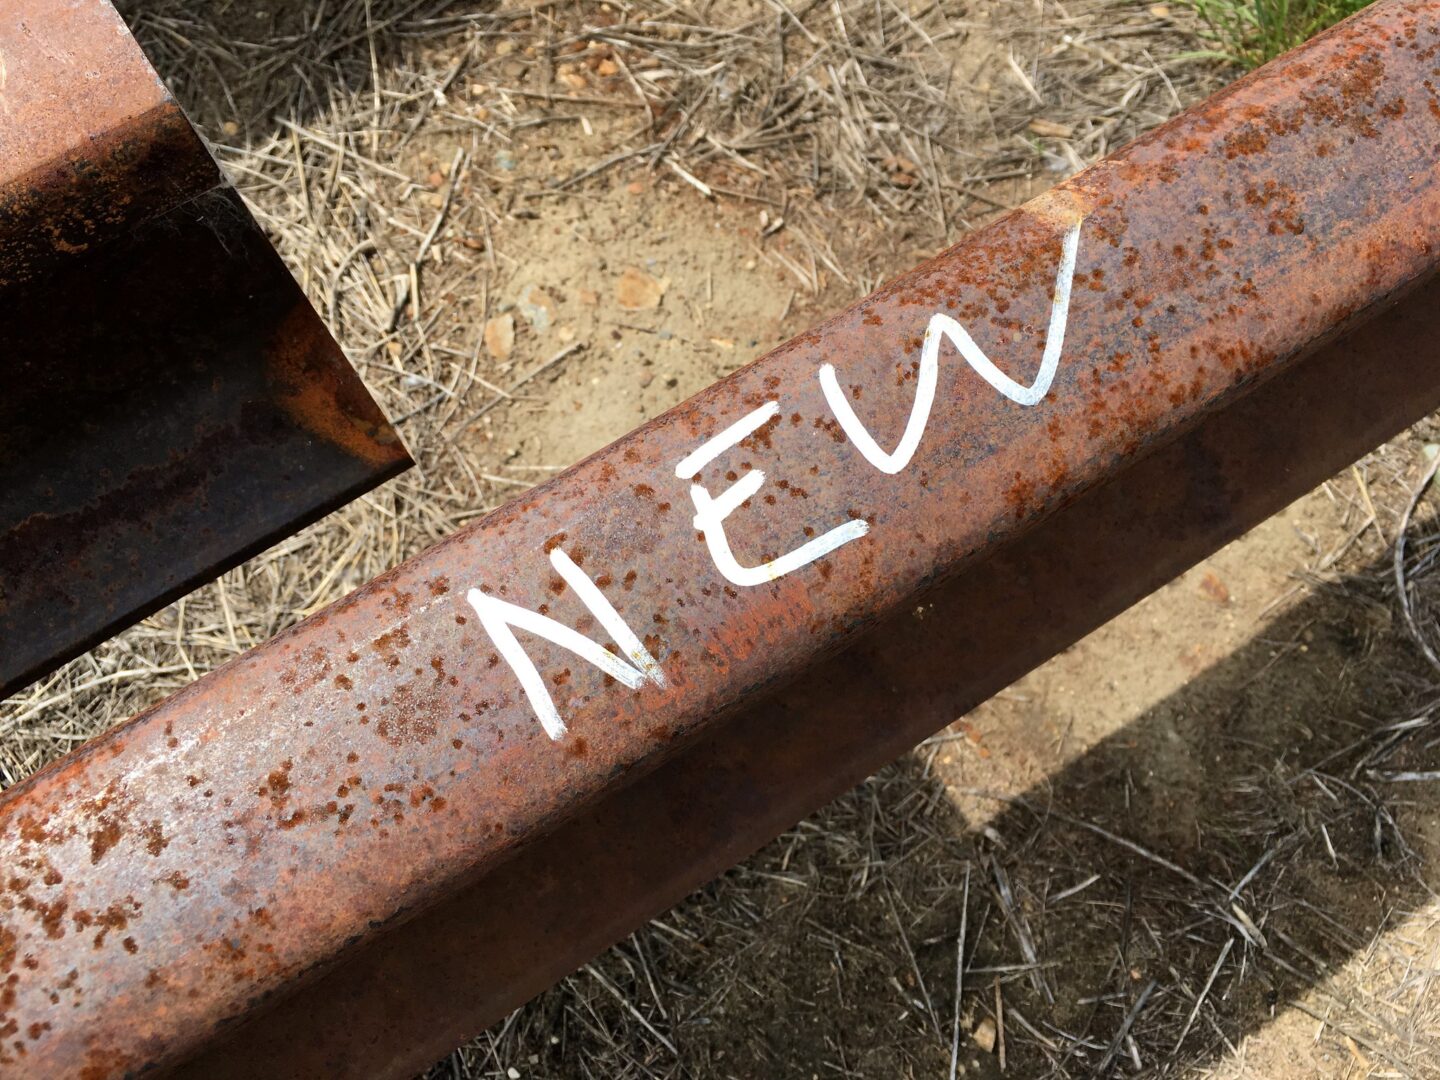 The word "New" hand written atop a rusted iron rail of a train track.